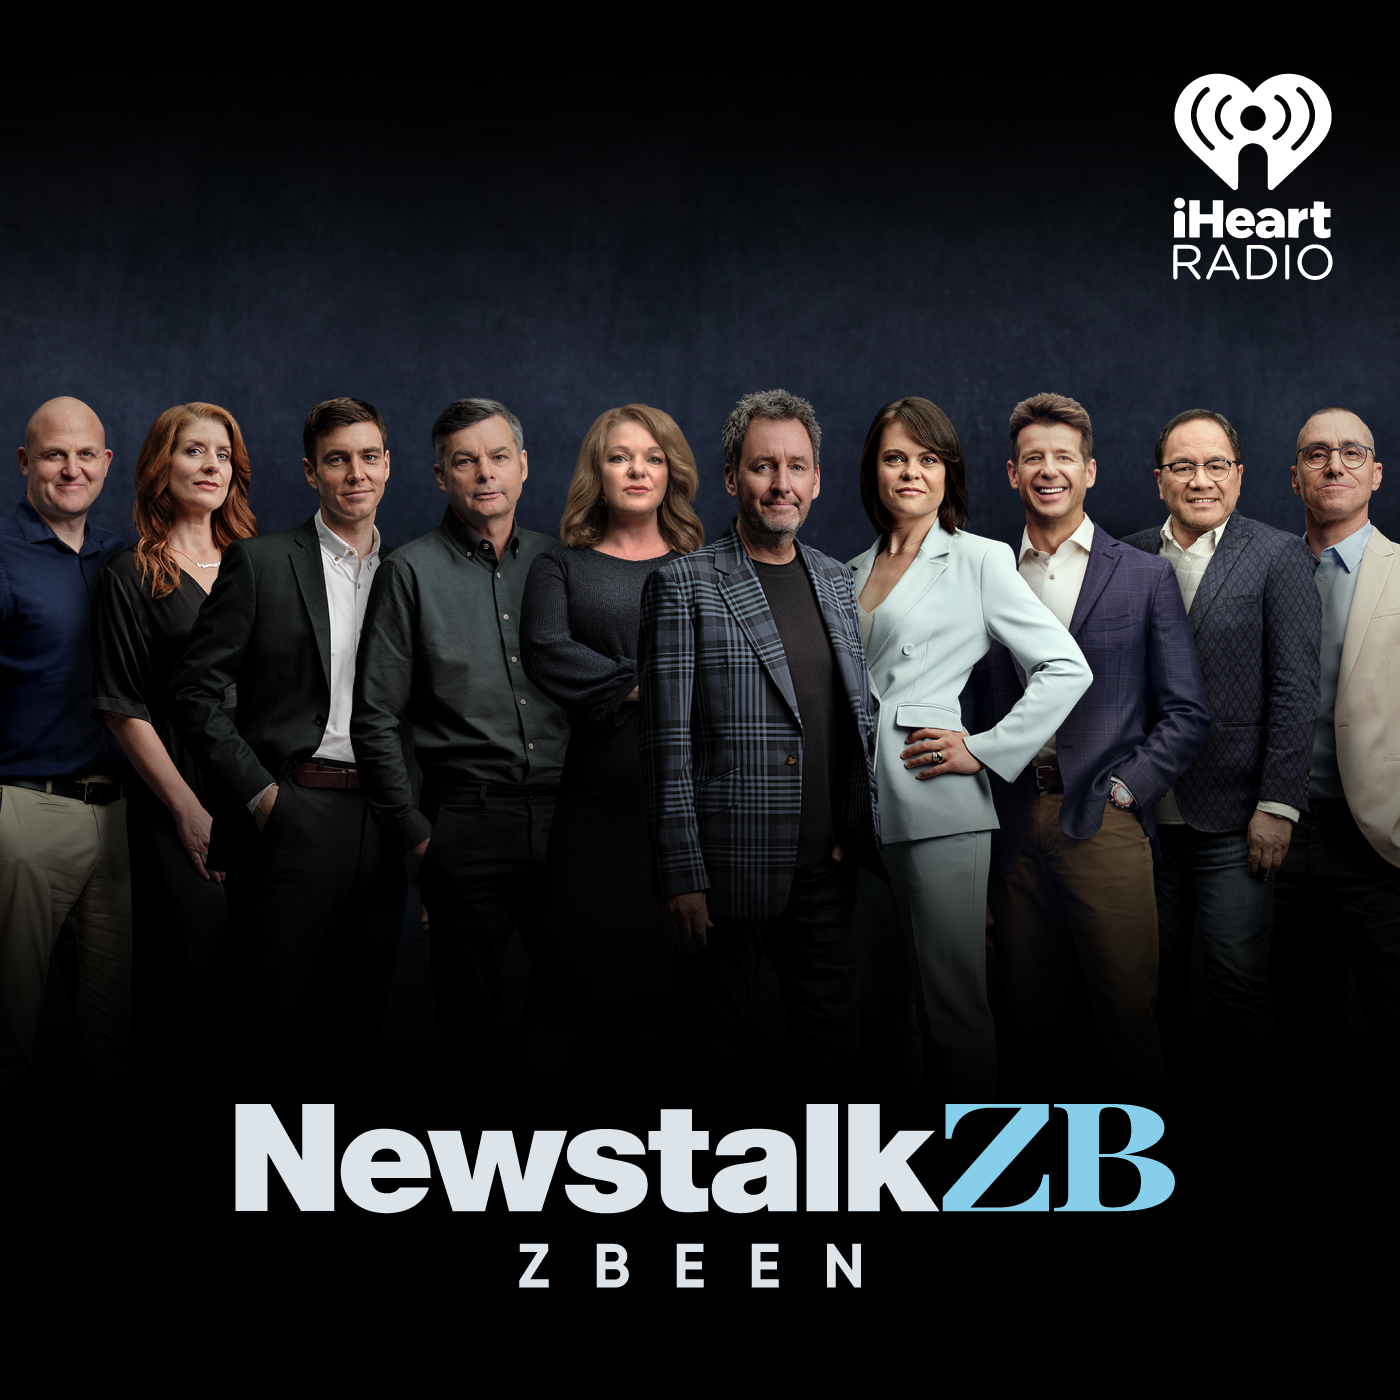 NEWSTALK ZBEEN: What We're Doing Now Isn't Working